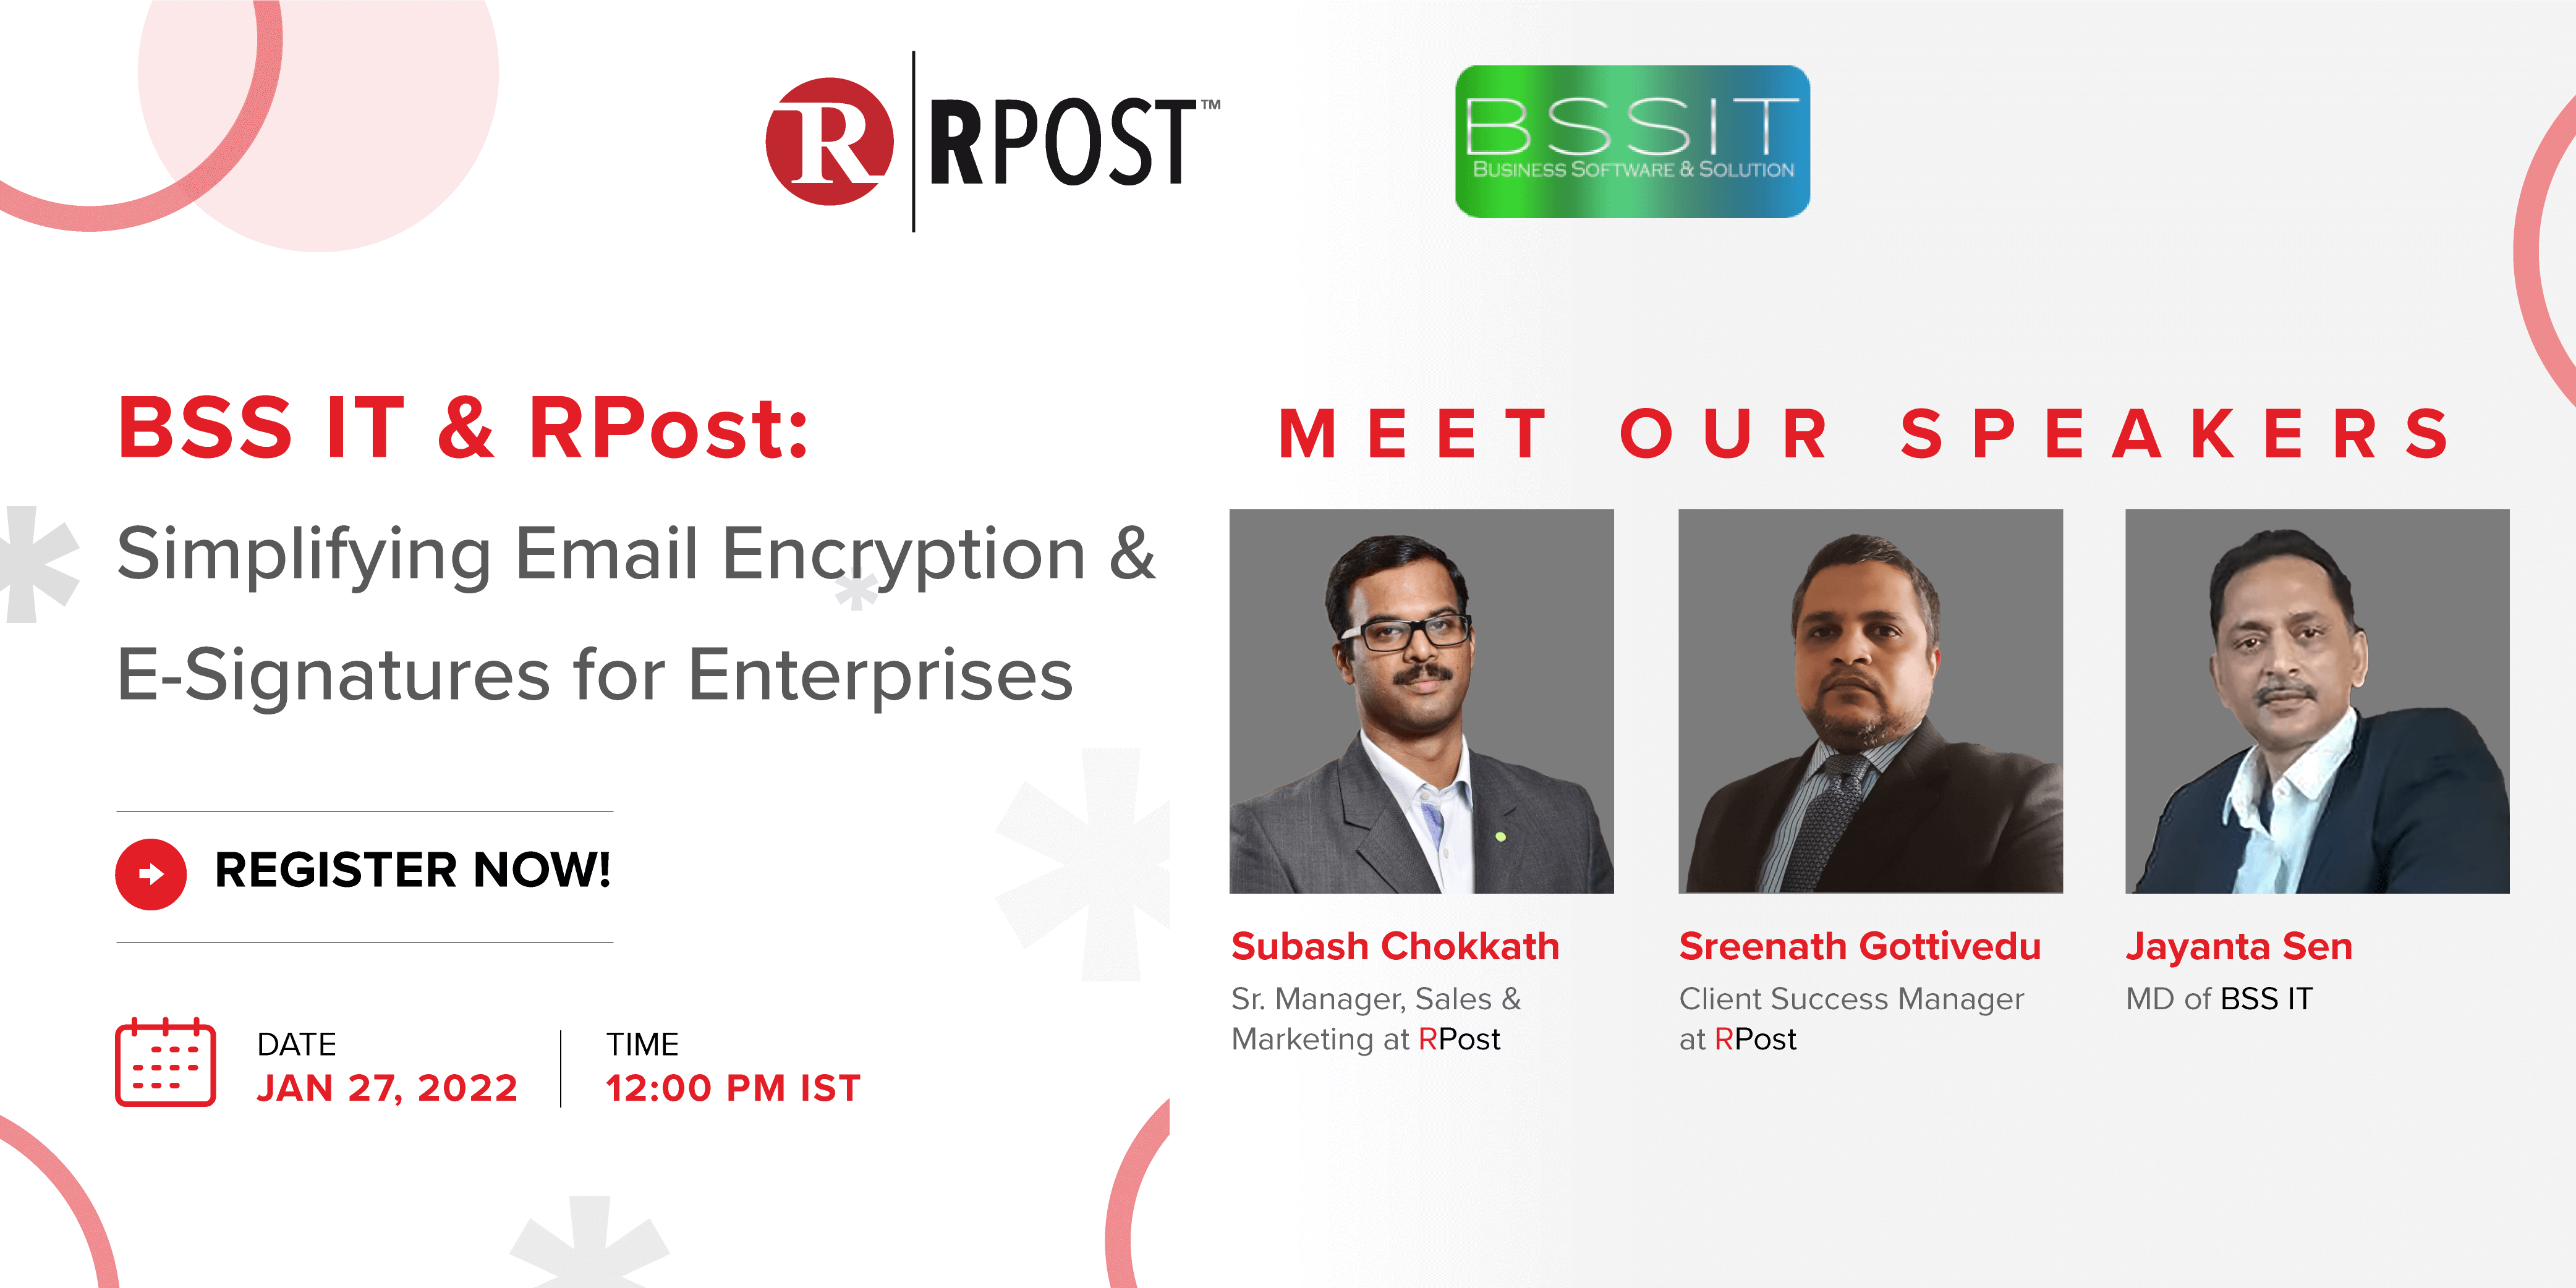 BSS IT & RPost: Simplifying Email Encryption For Enterprises